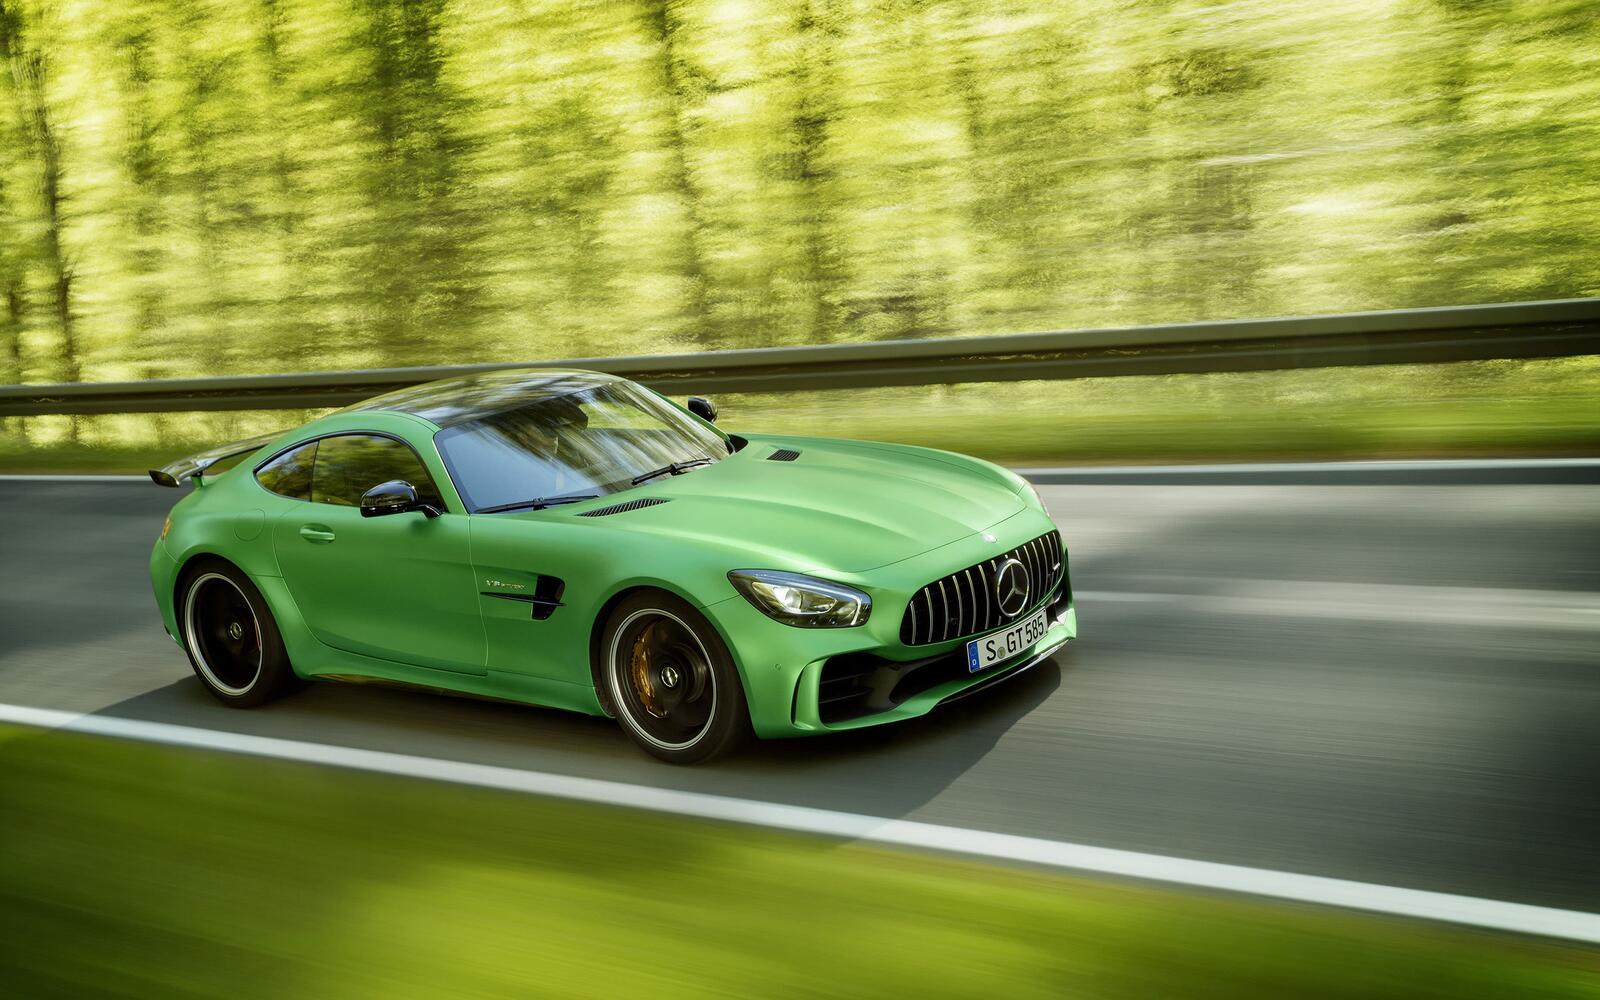 Free photo A green Mercedes amg gt r driving down a forest road.